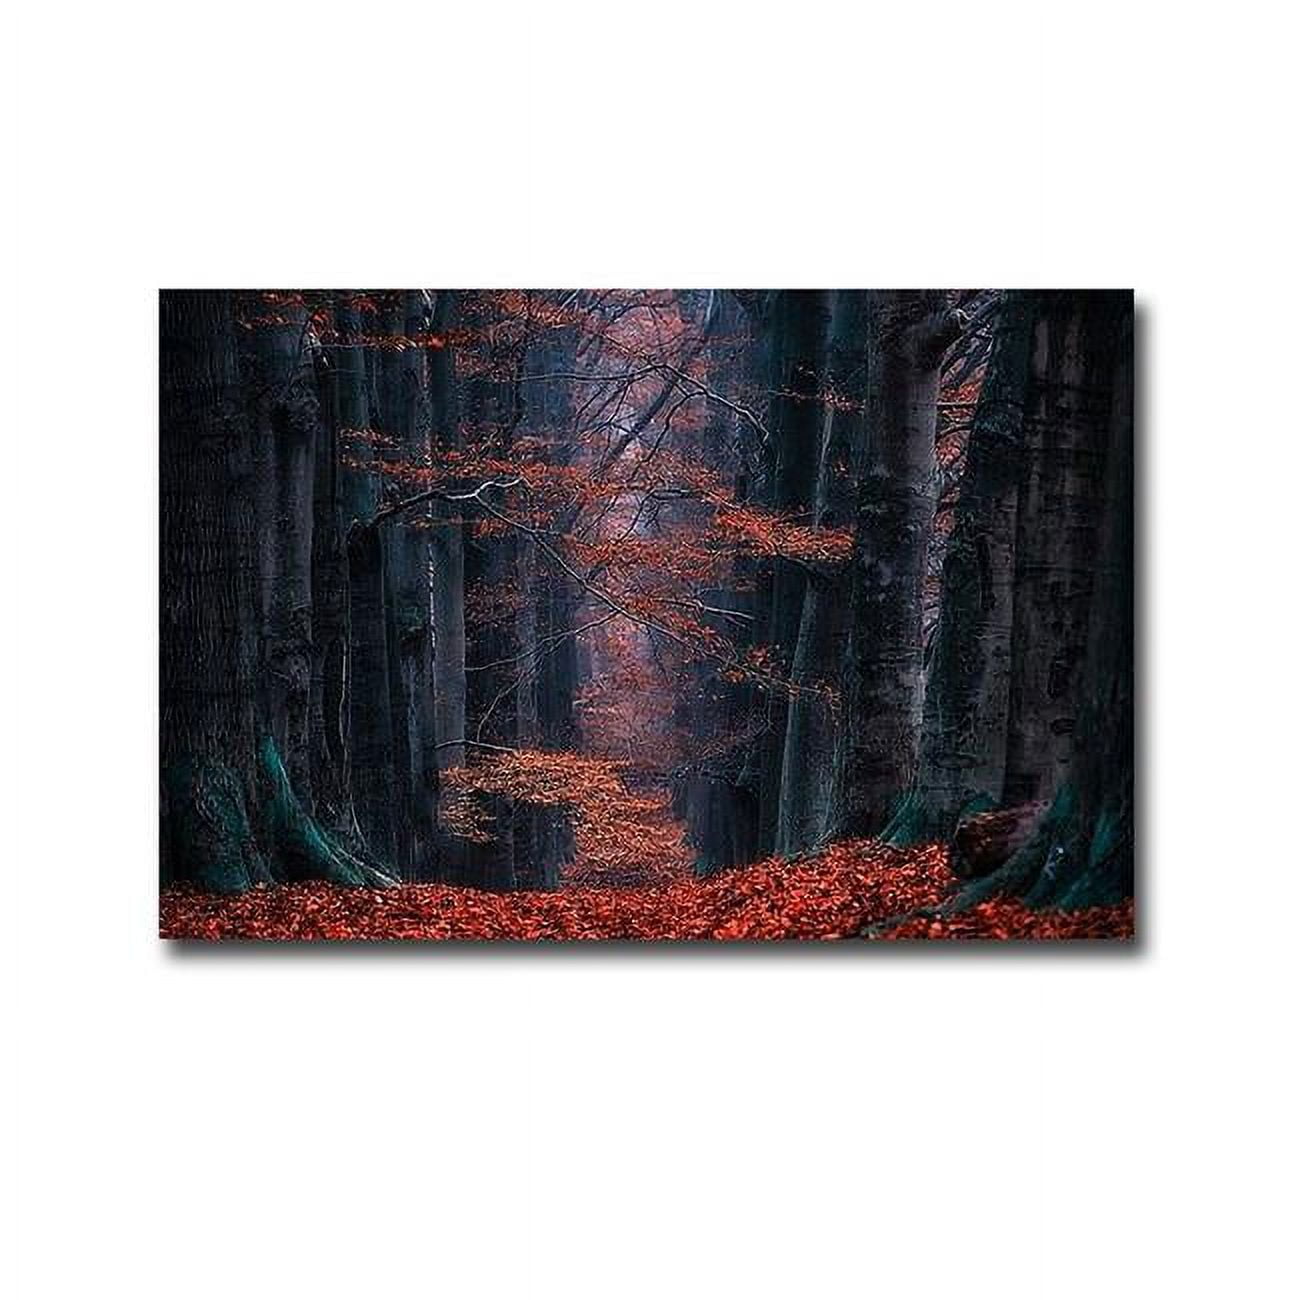 2436u788cg Synapse By Lars Van De Goor Premium Gallery-wrapped Canvas Giclee Art - Ready To Hang, 24 X 36 X 1.5 In.